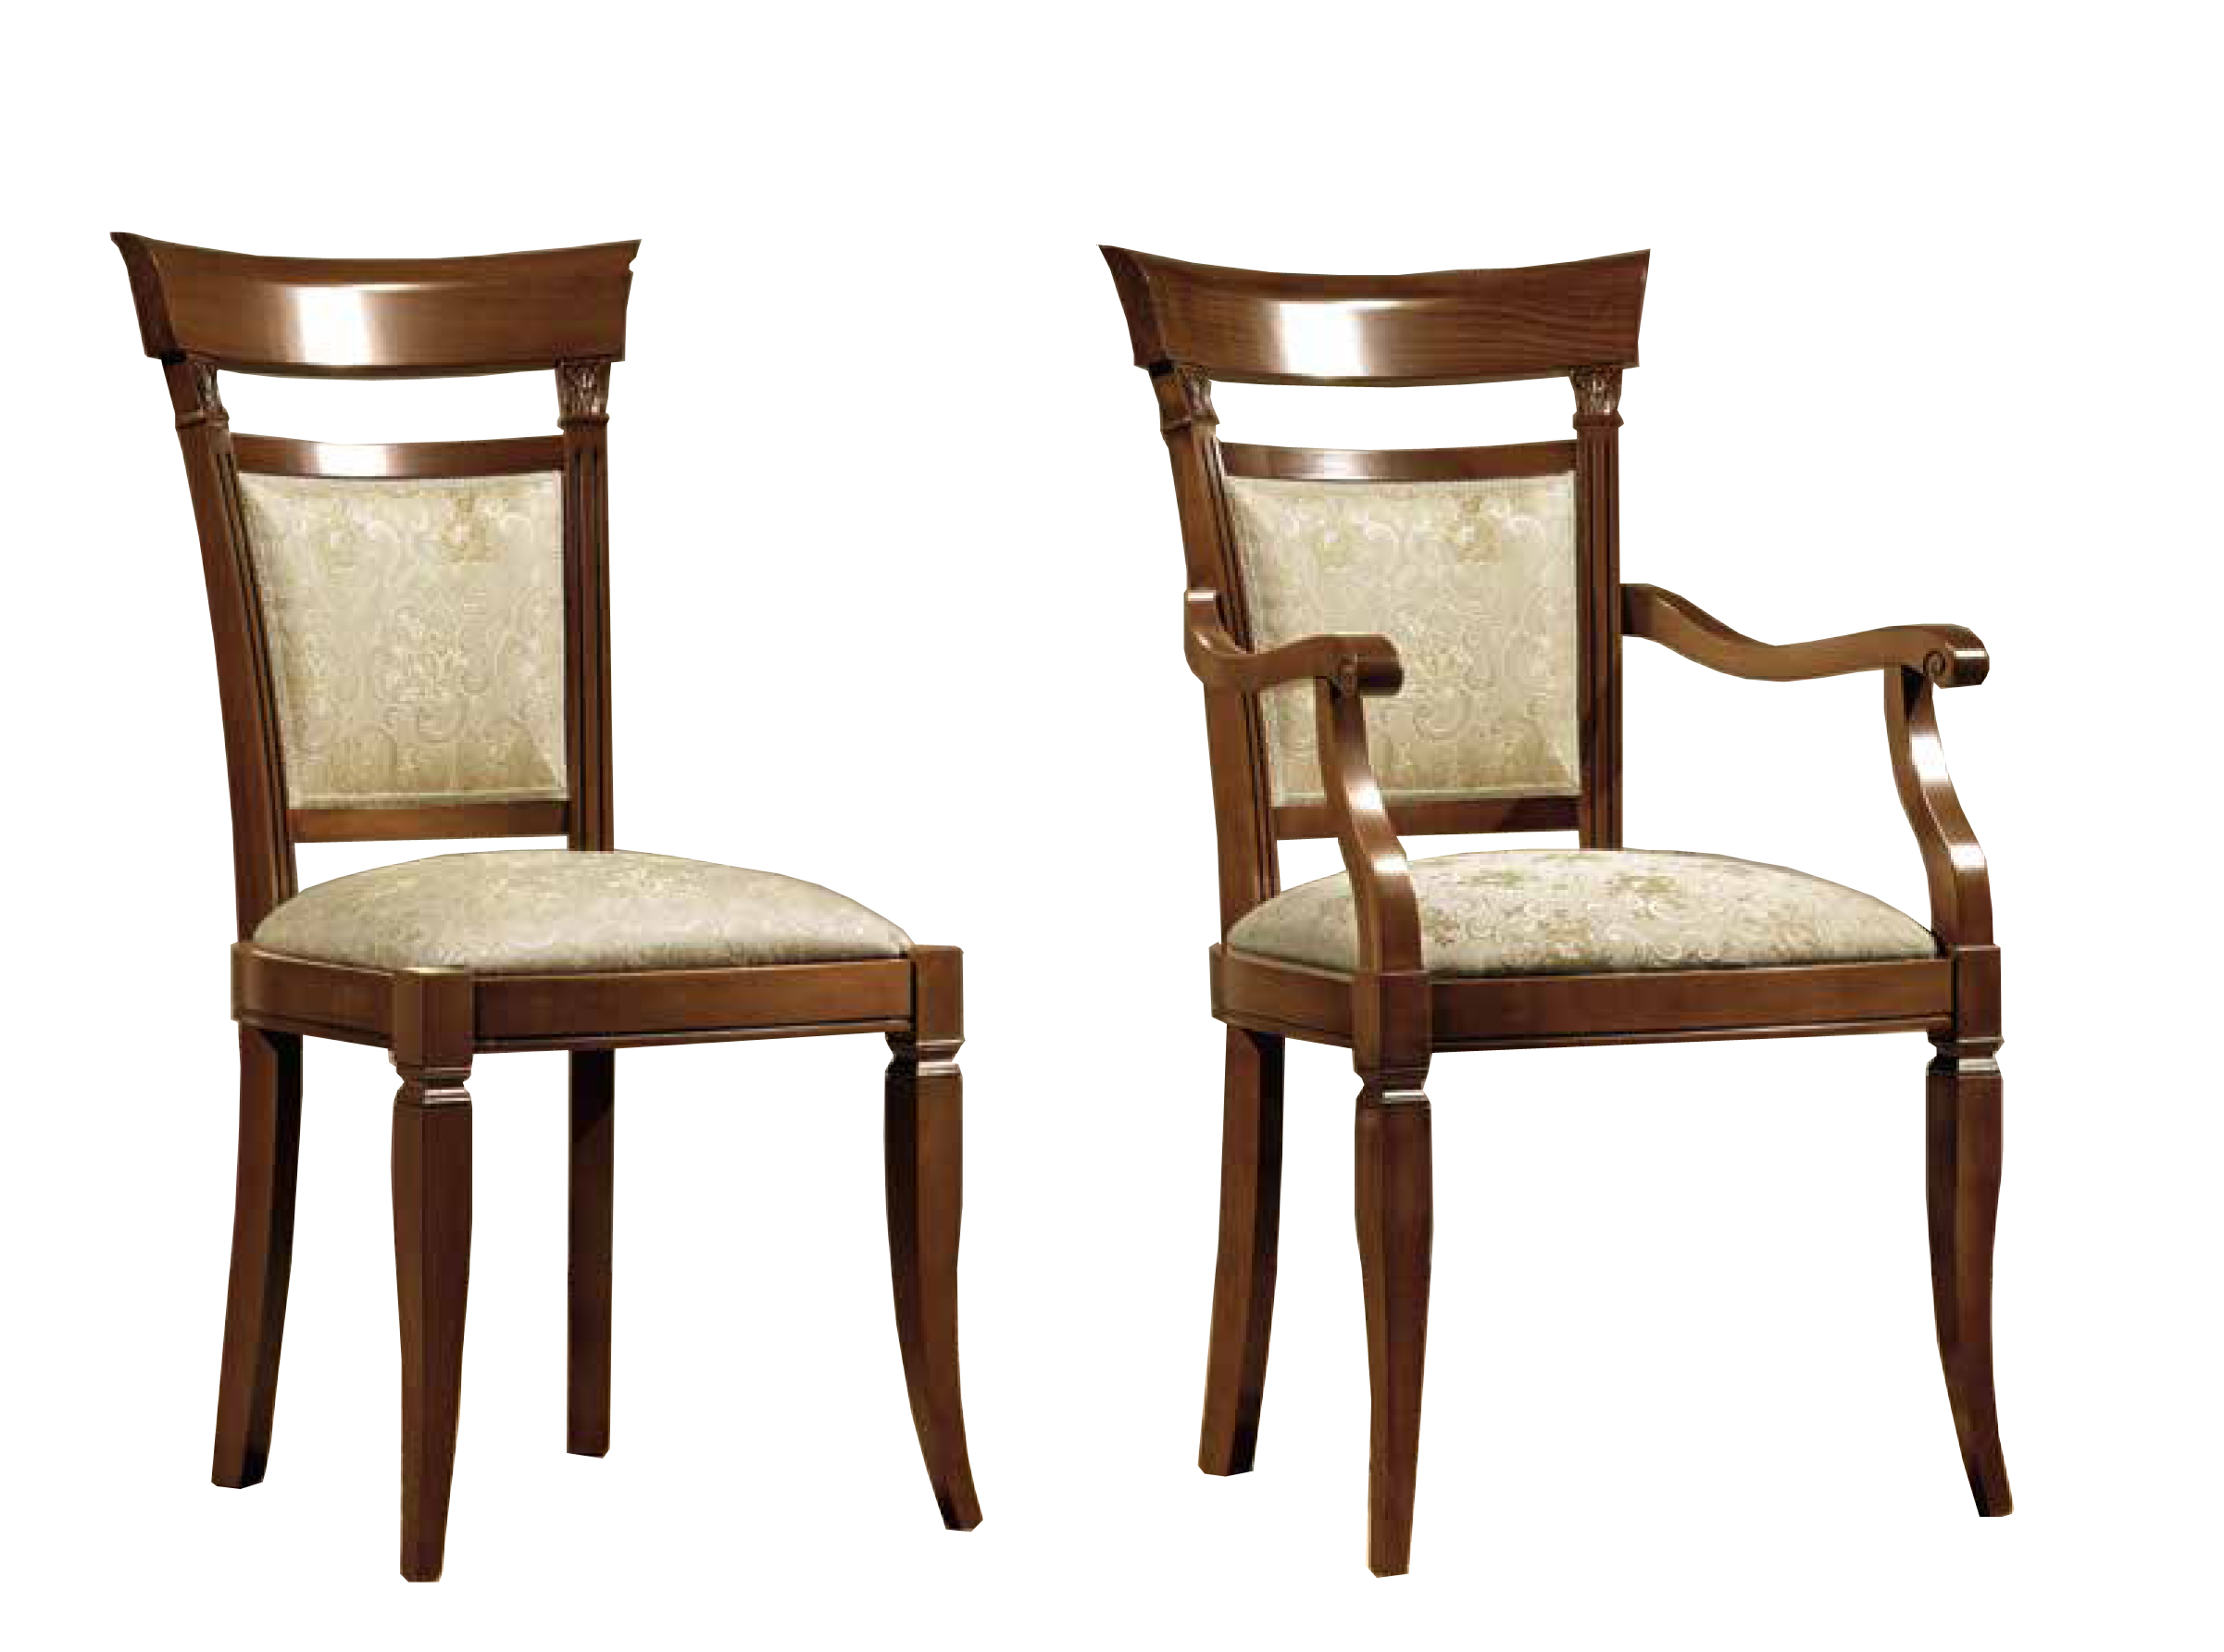 Dining Room Furniture Modern Dining Room Sets Treviso Chairs Cherry